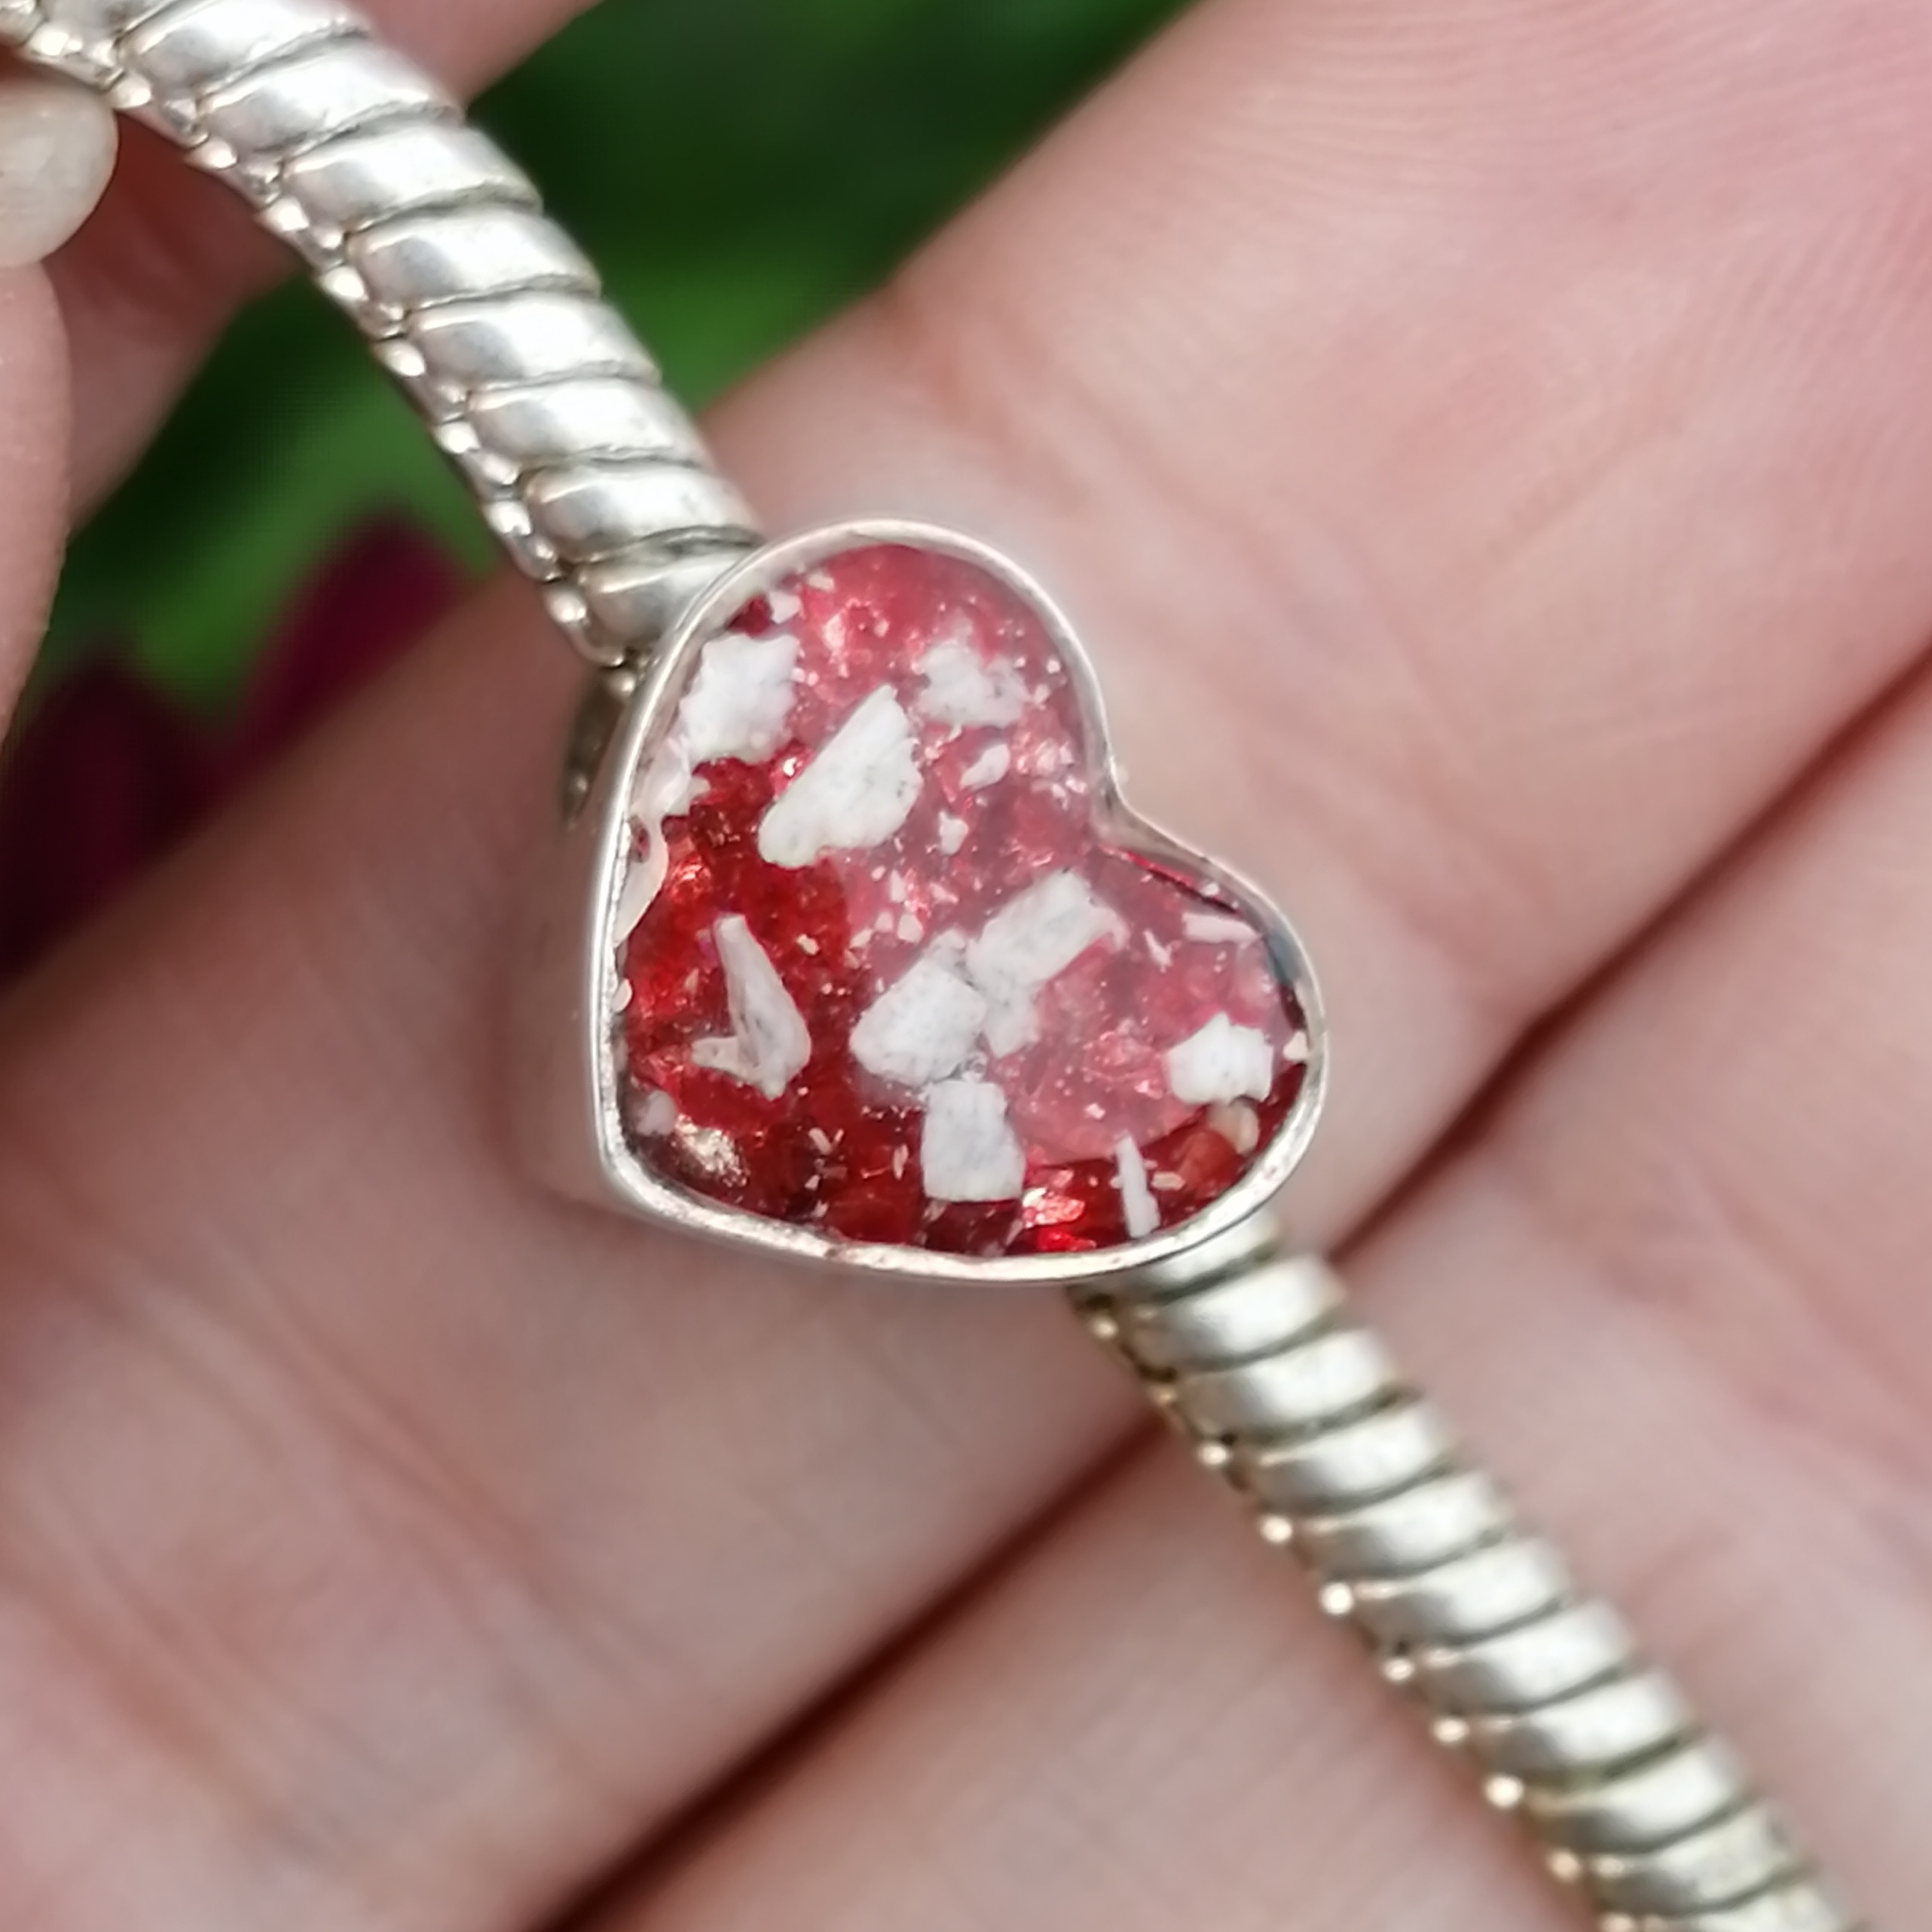 Ashes in Resin Silver heart bead